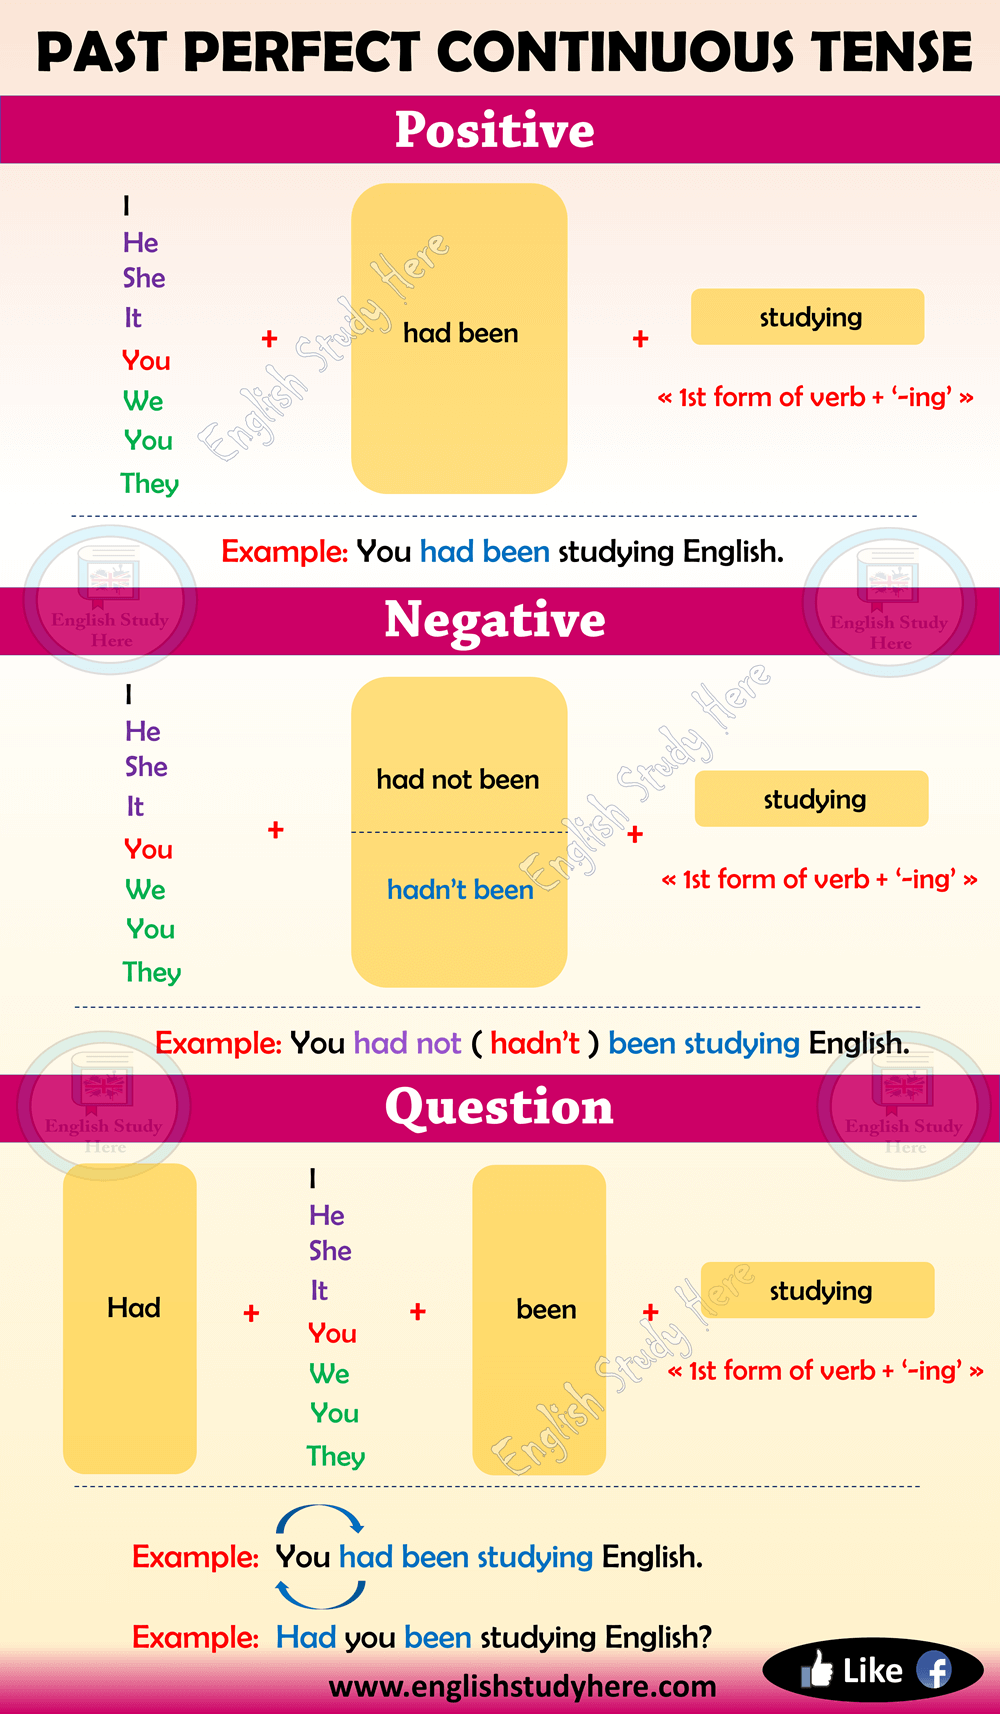 Past Perfect Continuous Tense In English - English Study Here 5E7